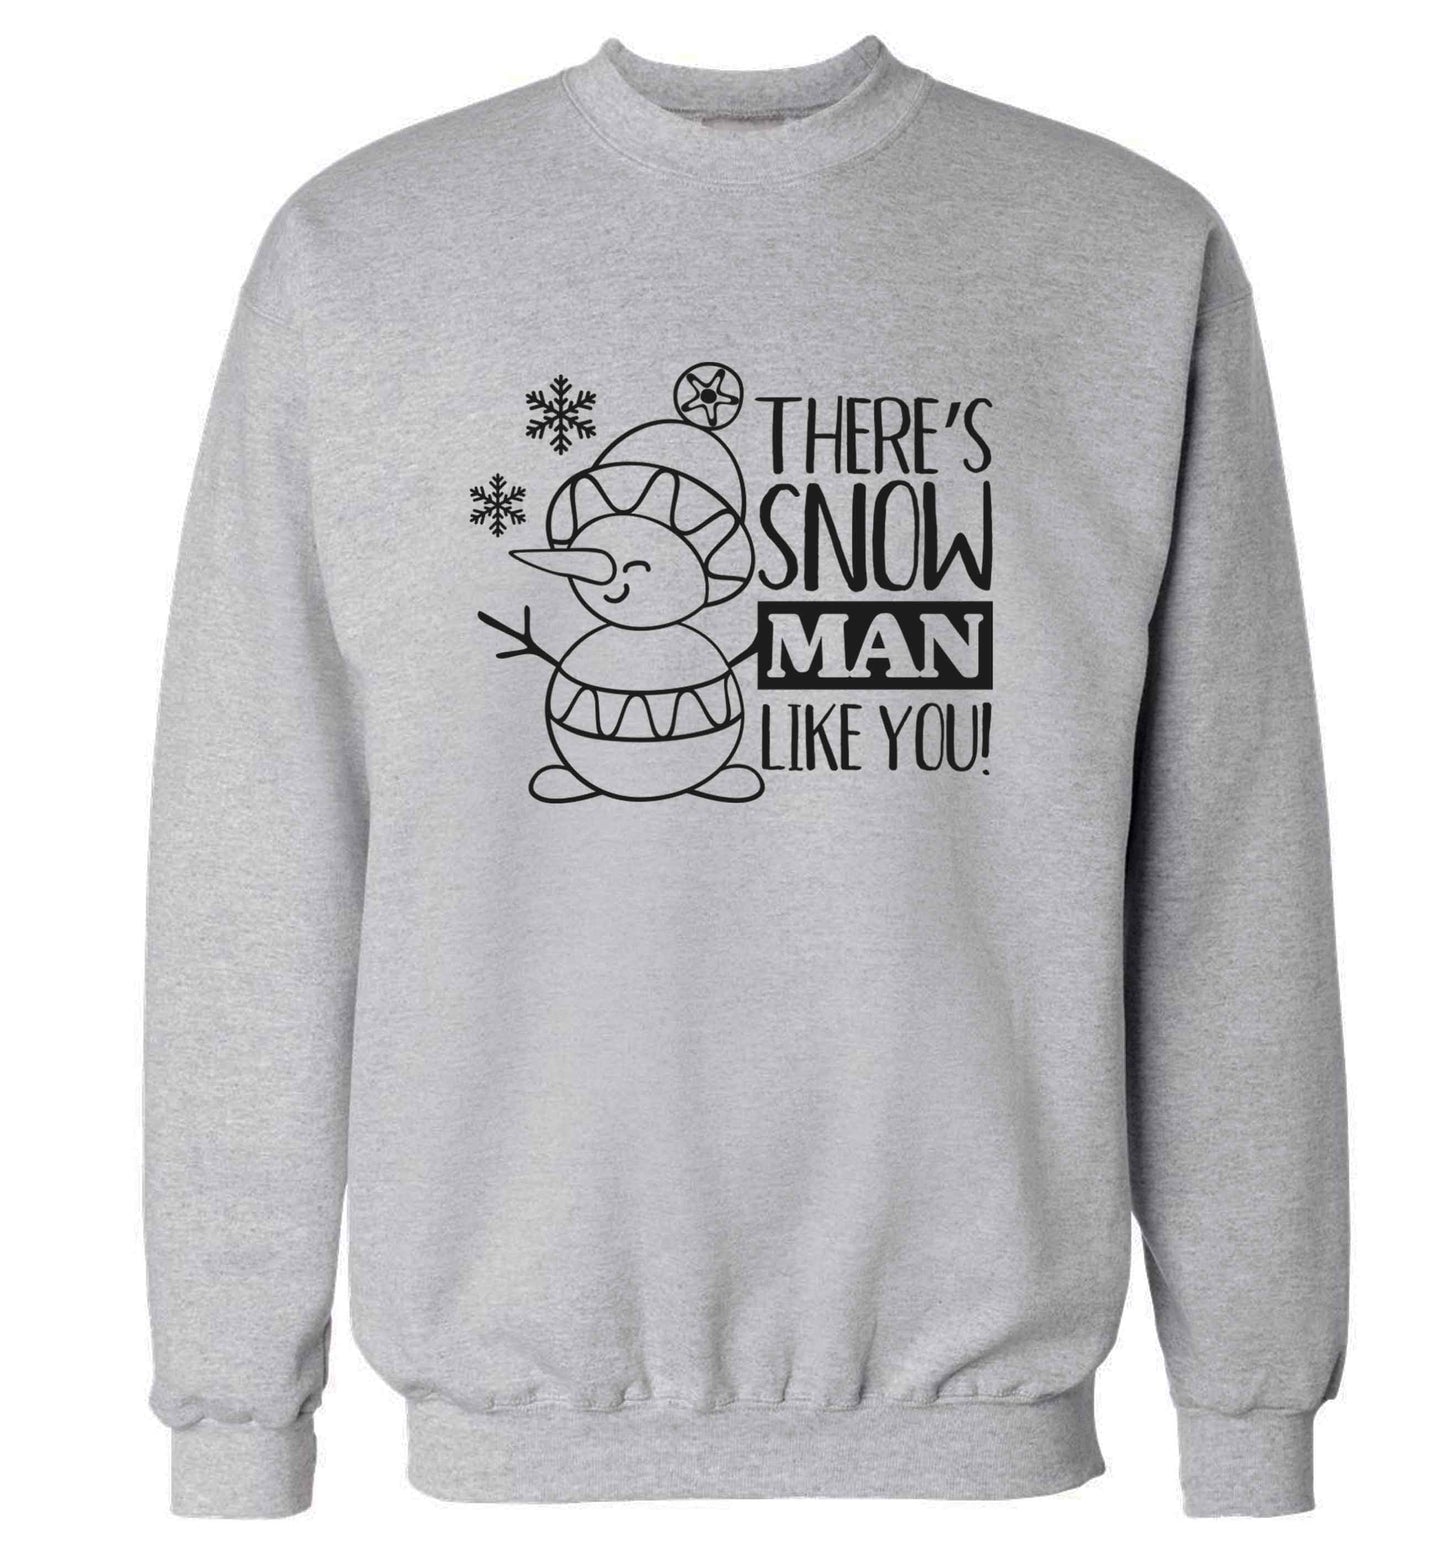 There's snow man like you adult's unisex grey sweater 2XL